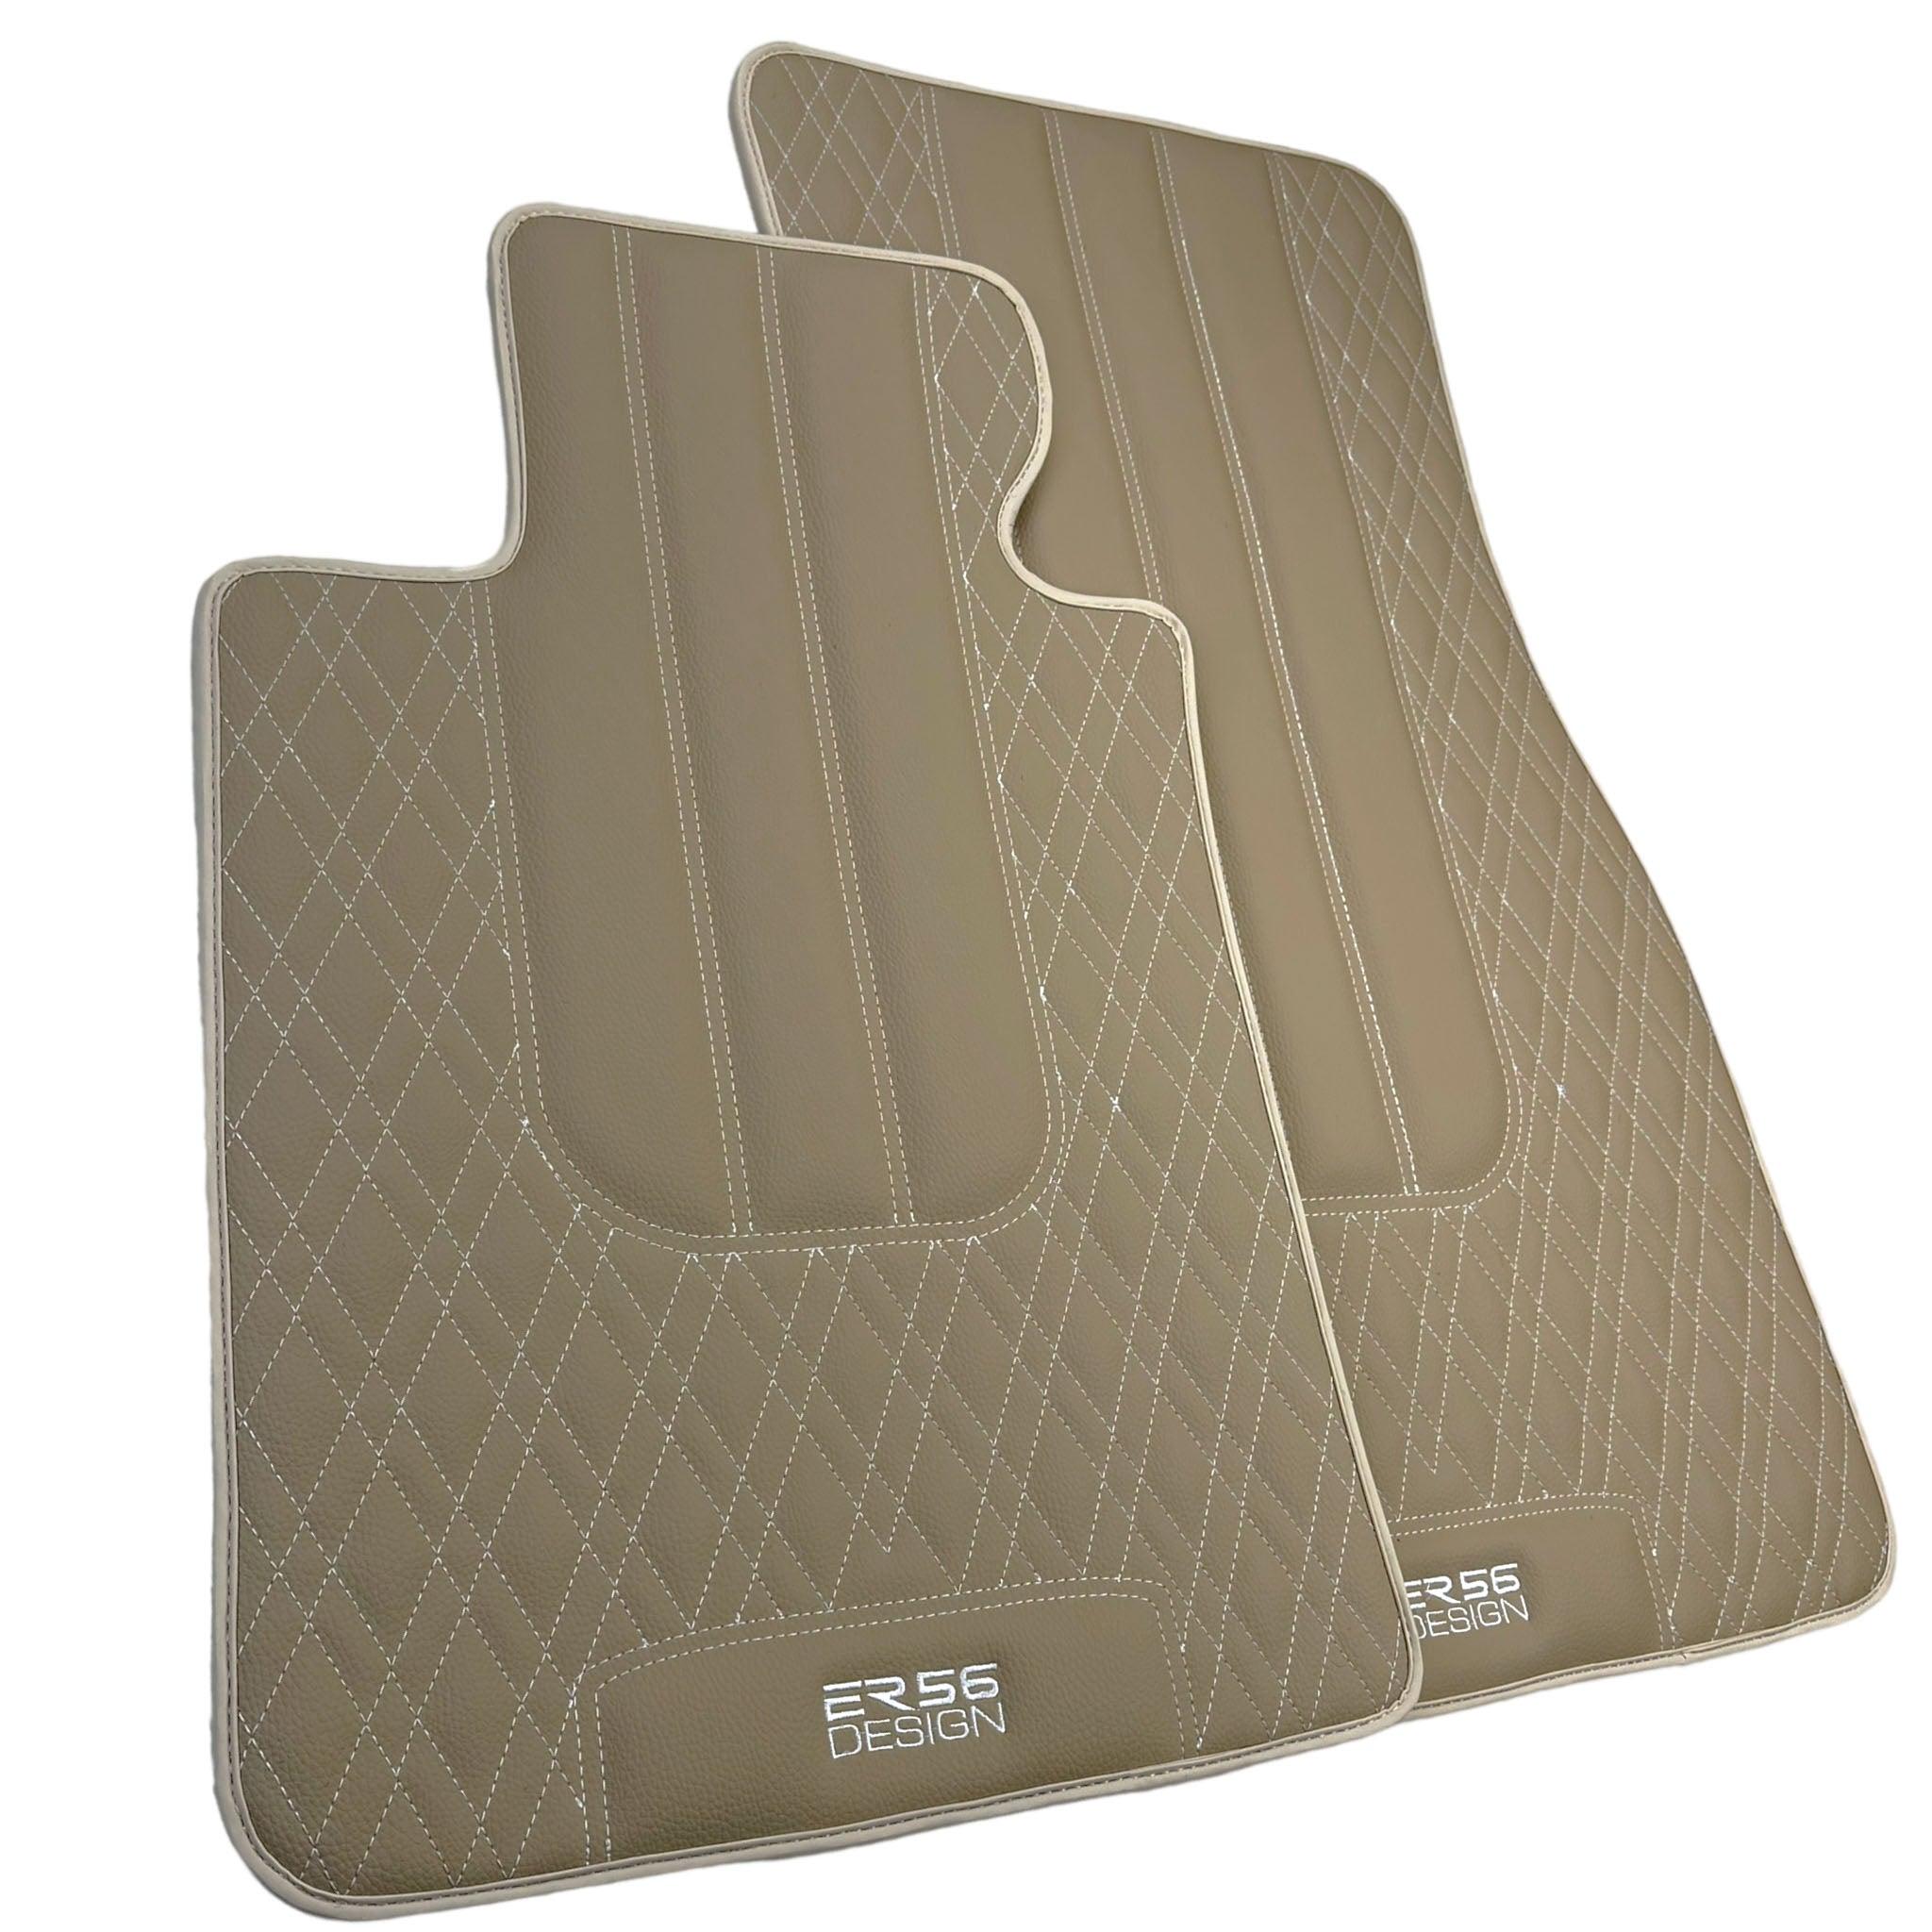 Beige Leather Floor Mats For BMW X5M E70 SUV